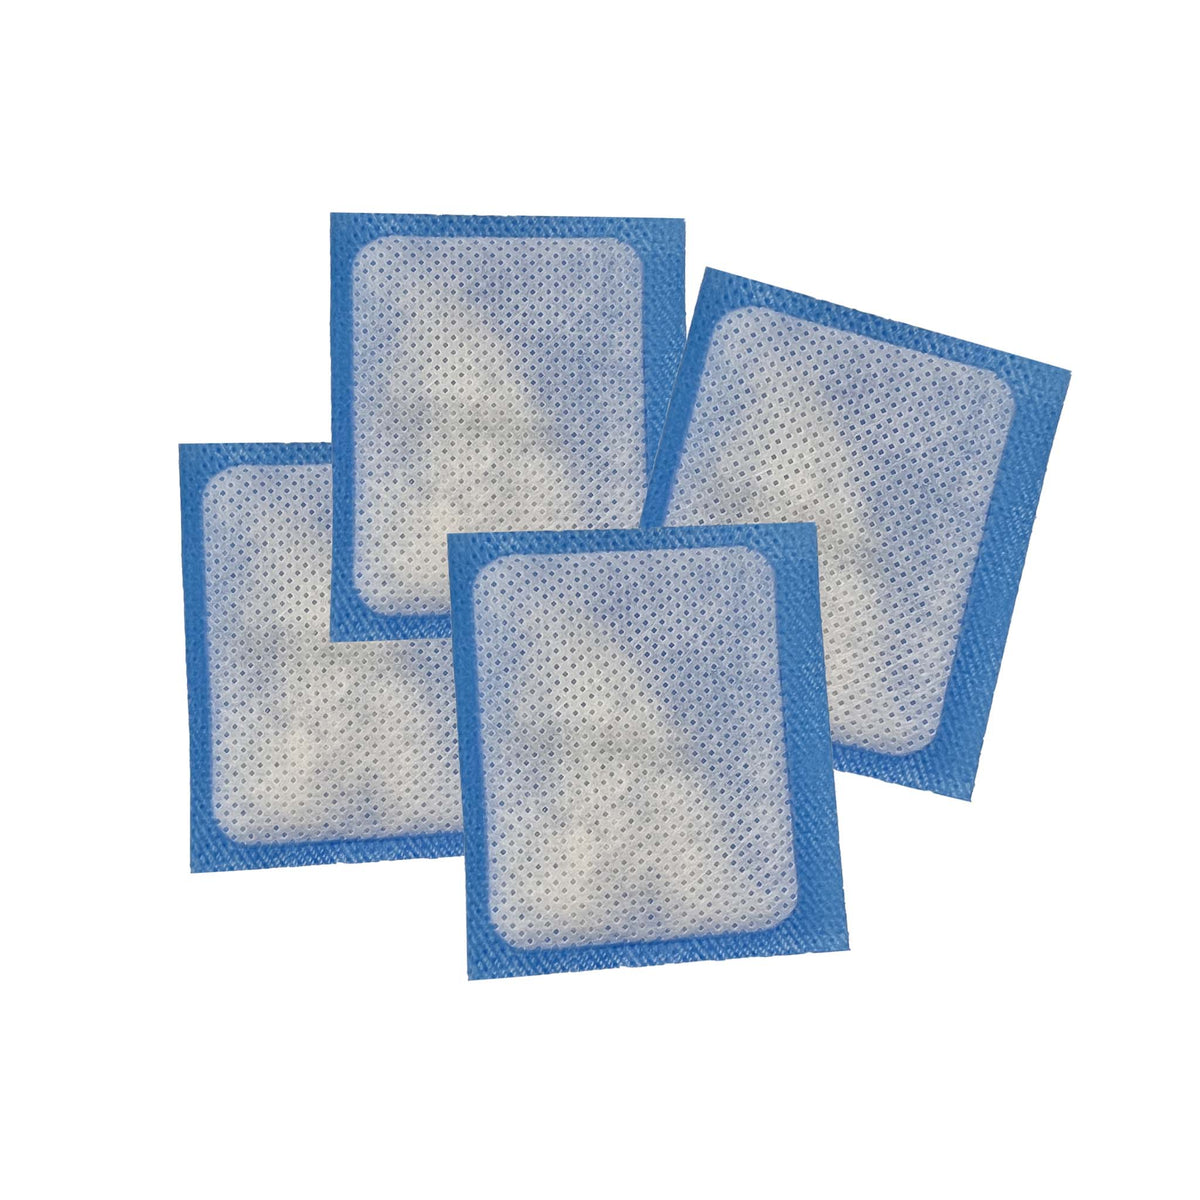 Stretto Violin/Viola Humidifier Replacement Bags, 4-Pack